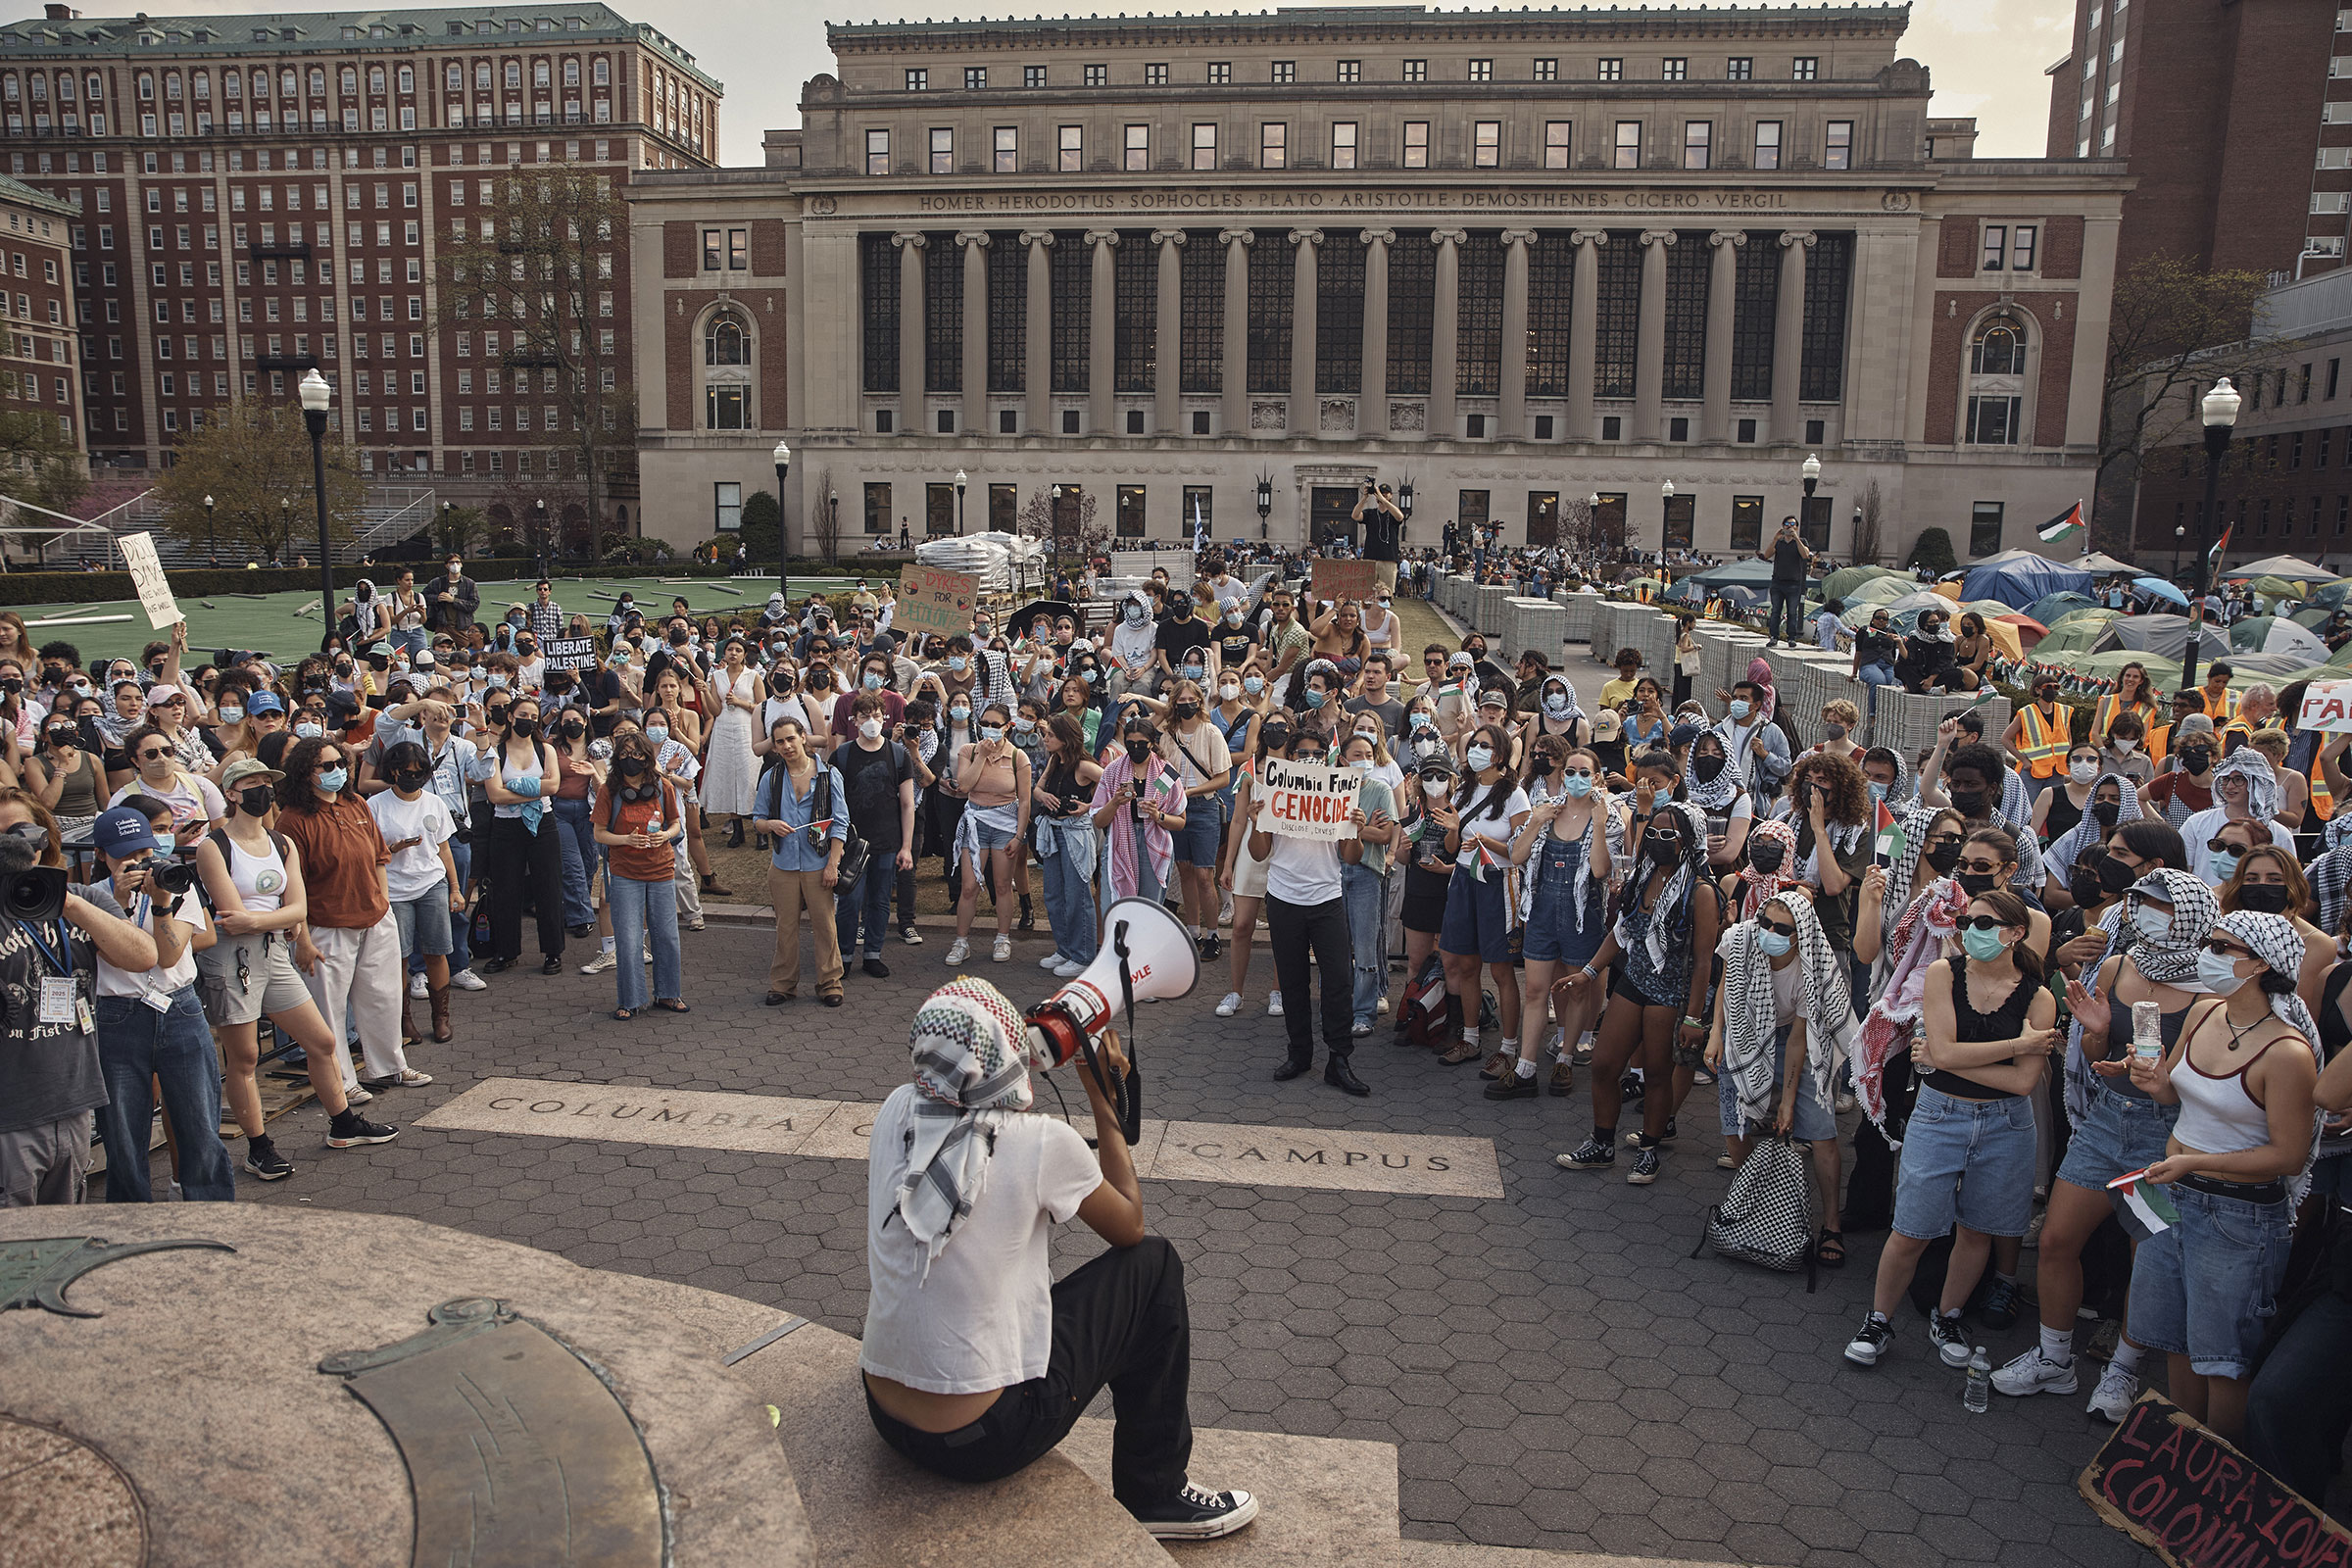 Protestors listen to a speaker during a pro-Palestinian encampment on Columbia University campus in New York City, on April 29.